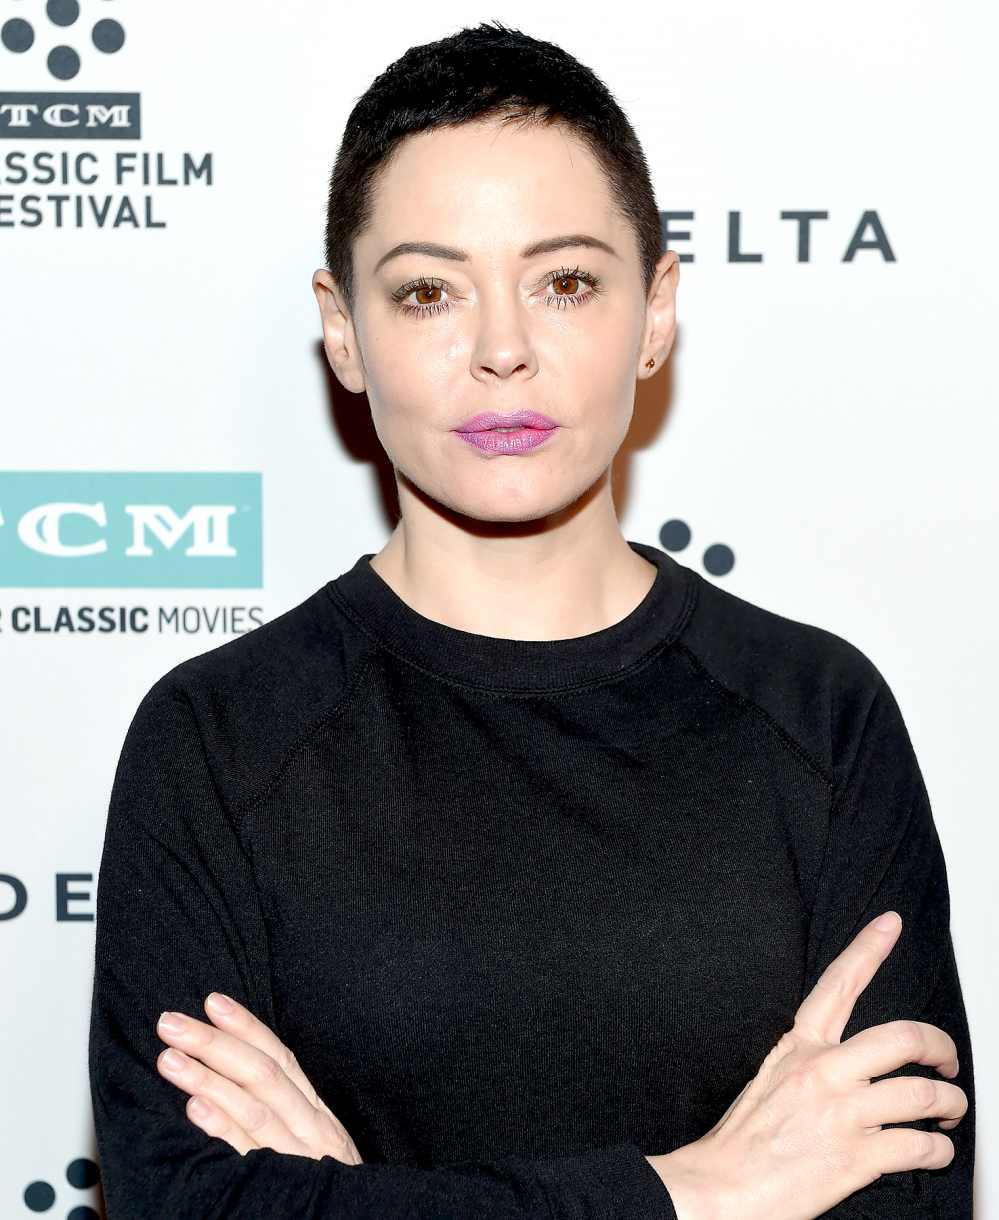 Rose McGowan attends the screening of 'Lady in the Dark' during the 2017 TCM Classic Film Festival on April 9, 2017 in Los Angeles, California.